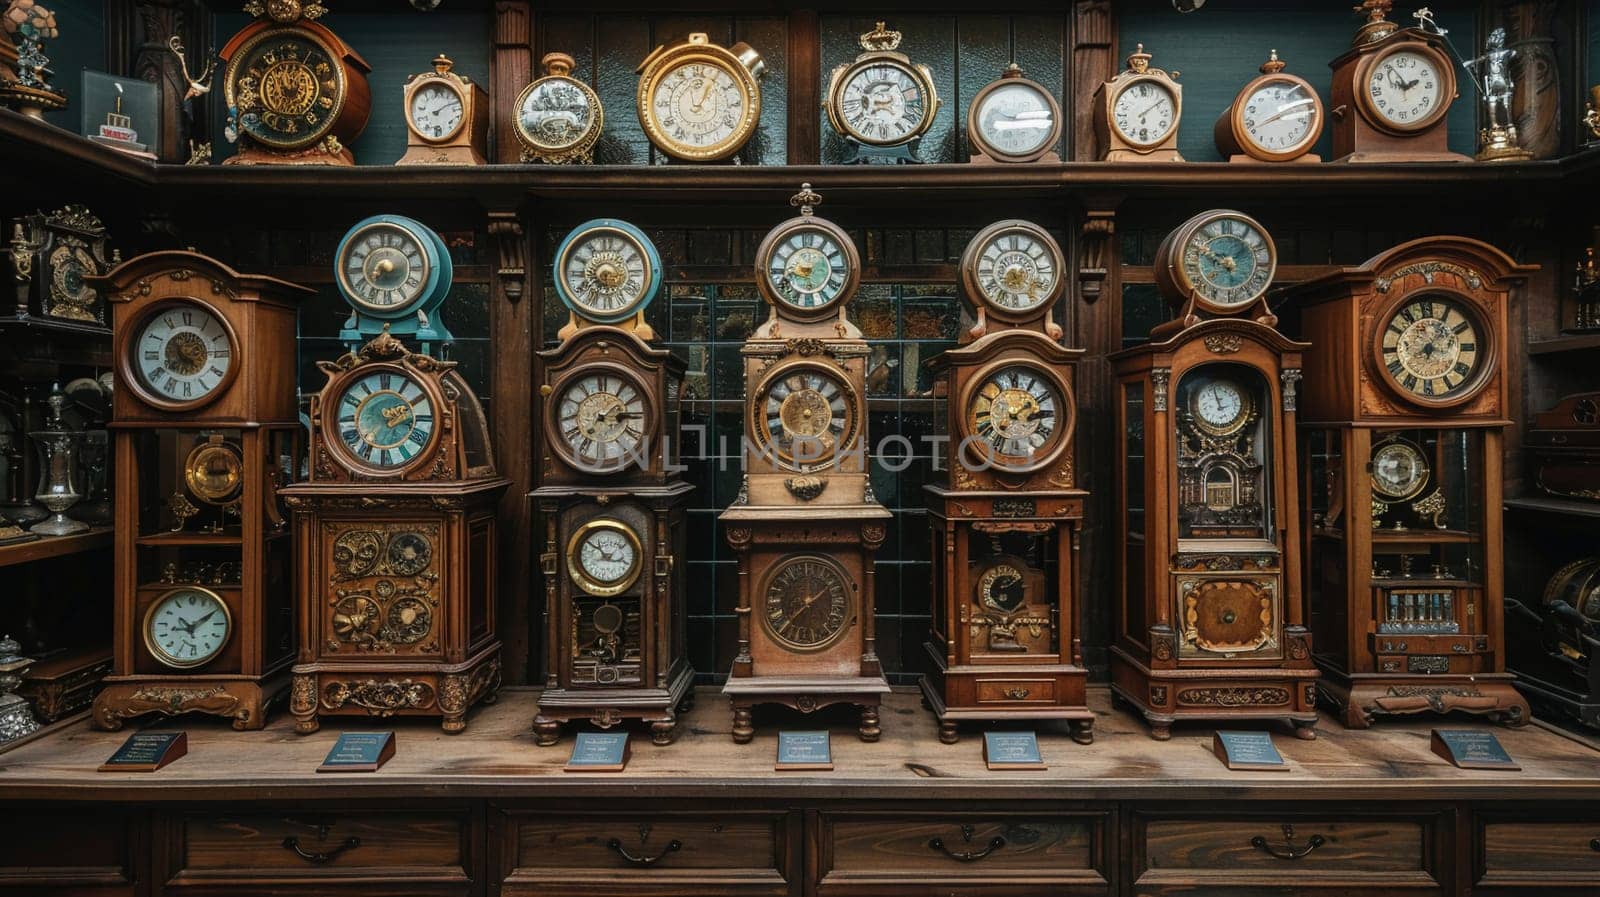 Antique Collection Unveils Historical Elegance in Business of Time-Honored Treasures, Antique clocks and collectible curios unveil a story of historical elegance and time-honored treasures in the antique collection business.